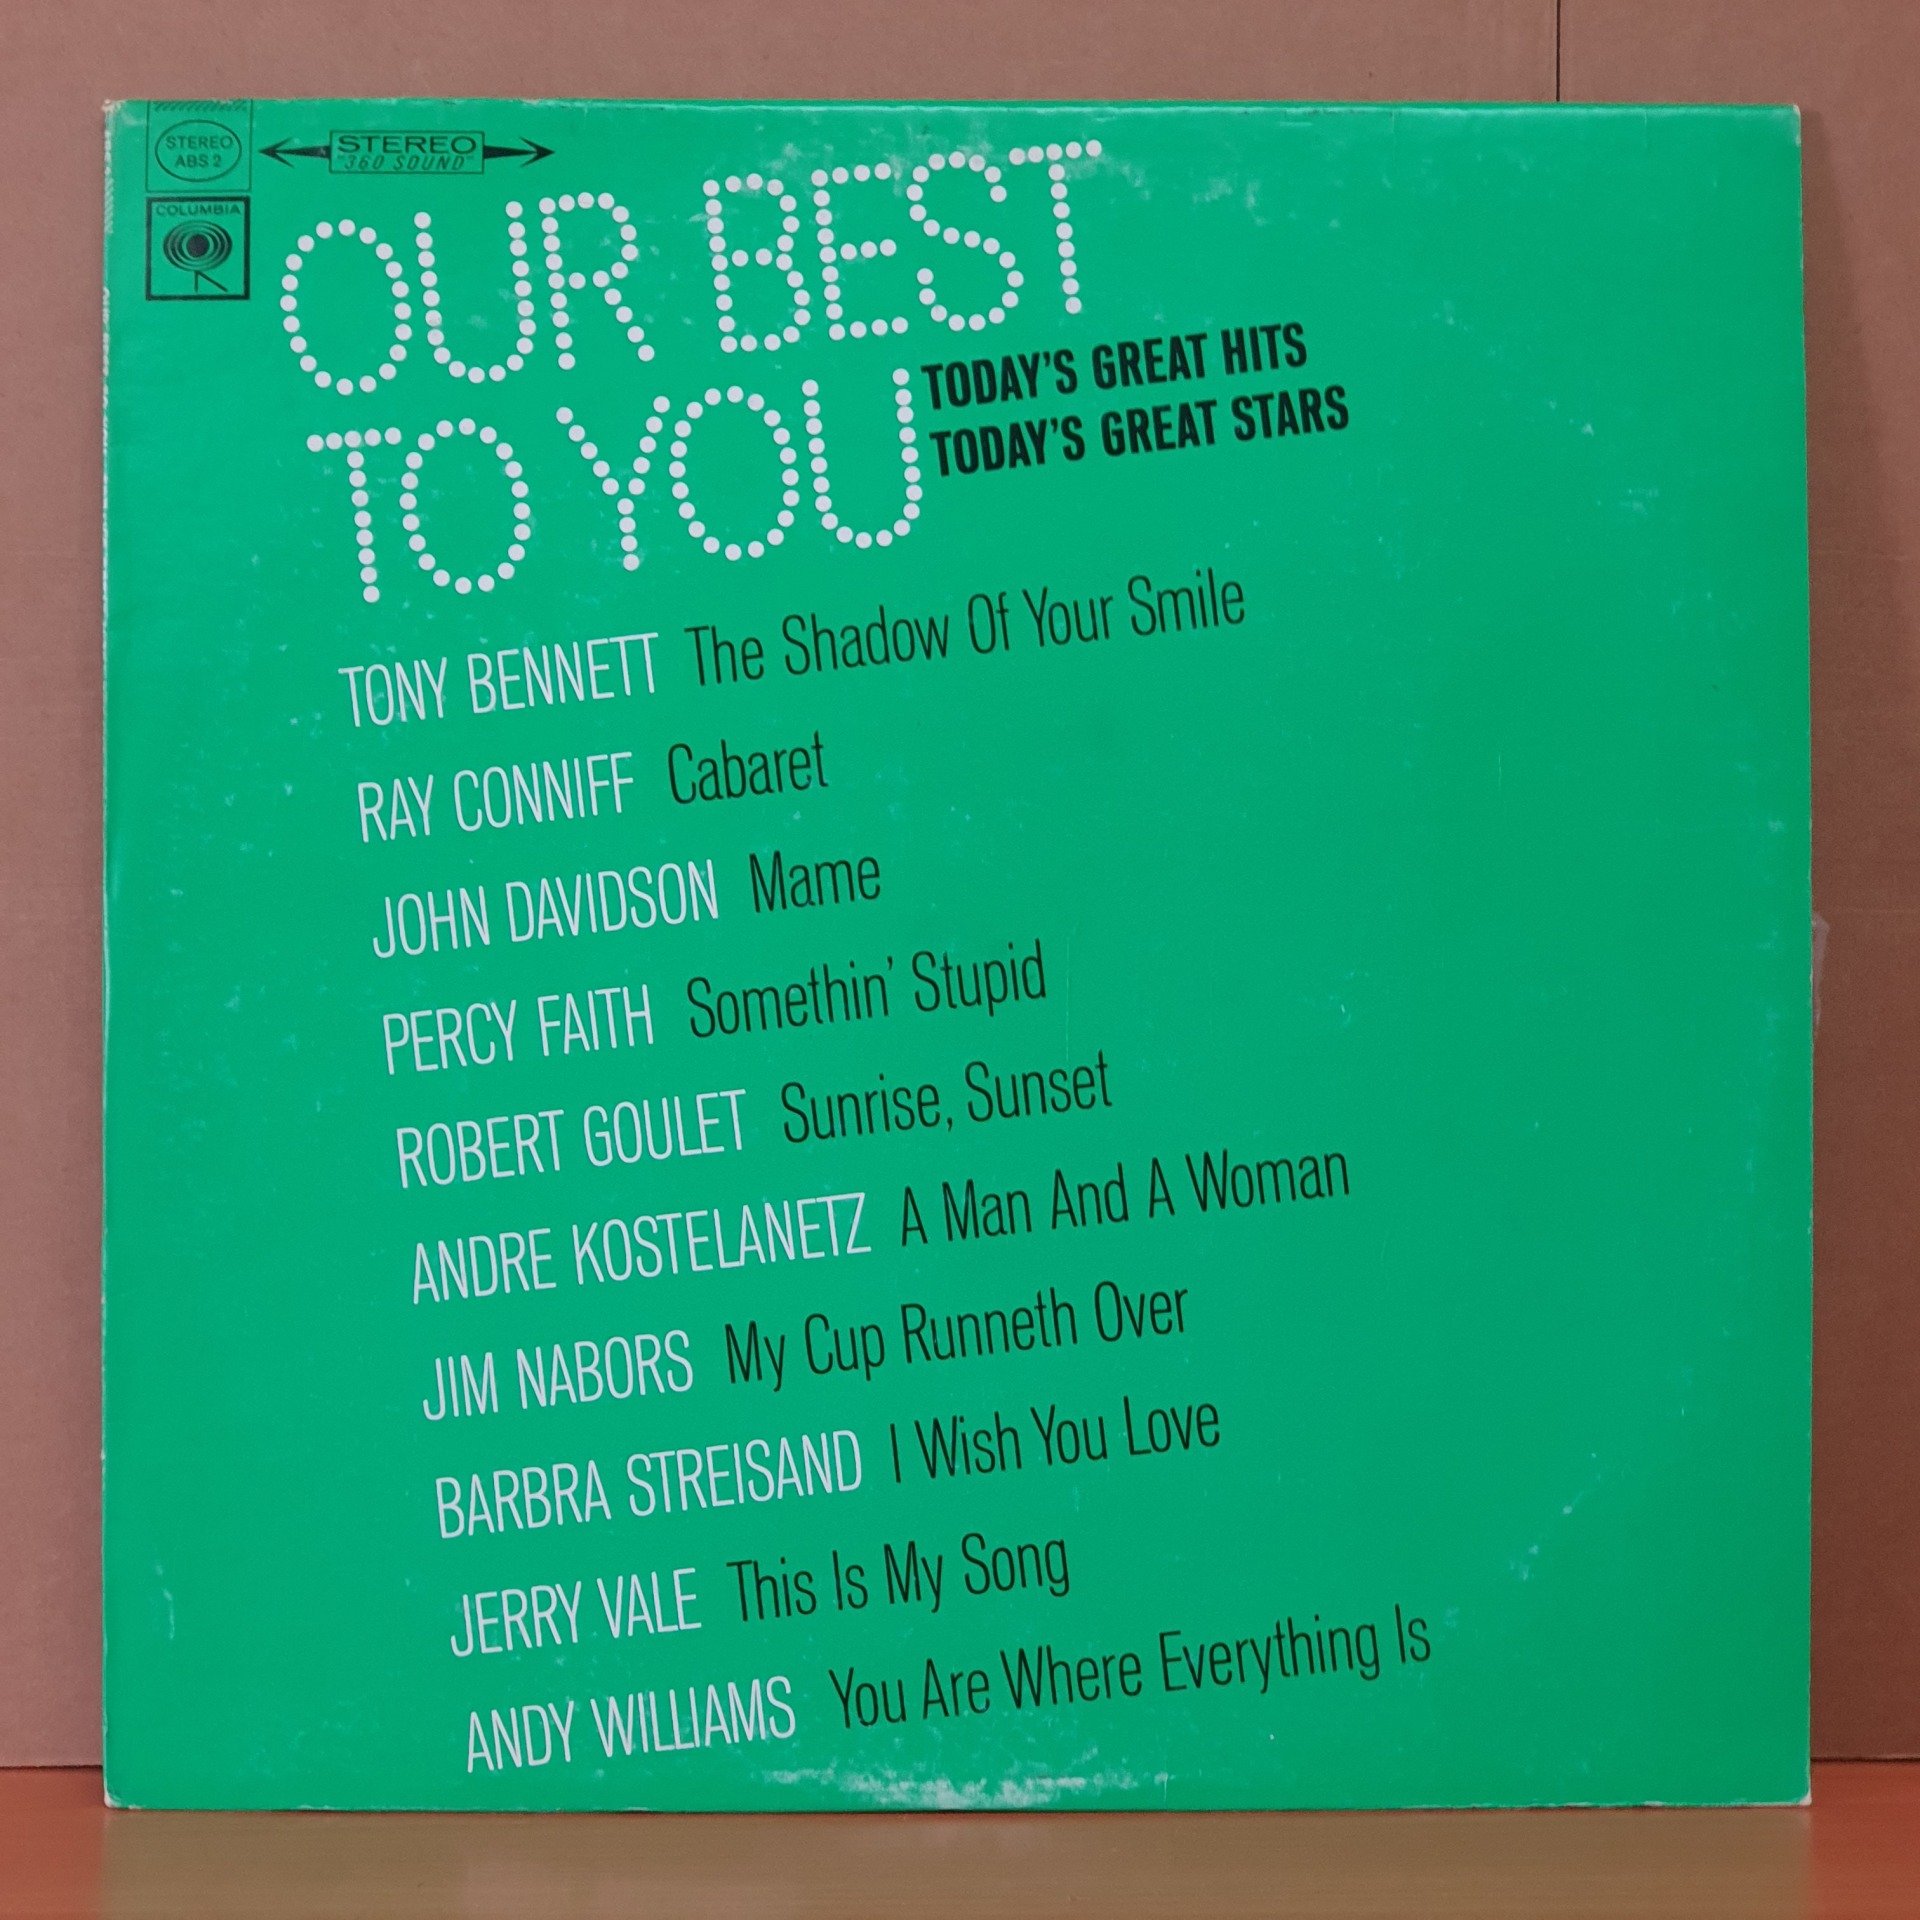 OUR BEST TO YOU / TONY BENNETT, RAY CONNIFF, PERCY FAITH, JIM NABORS, JERRY VALE (1967) - LP 2.EL PLAK